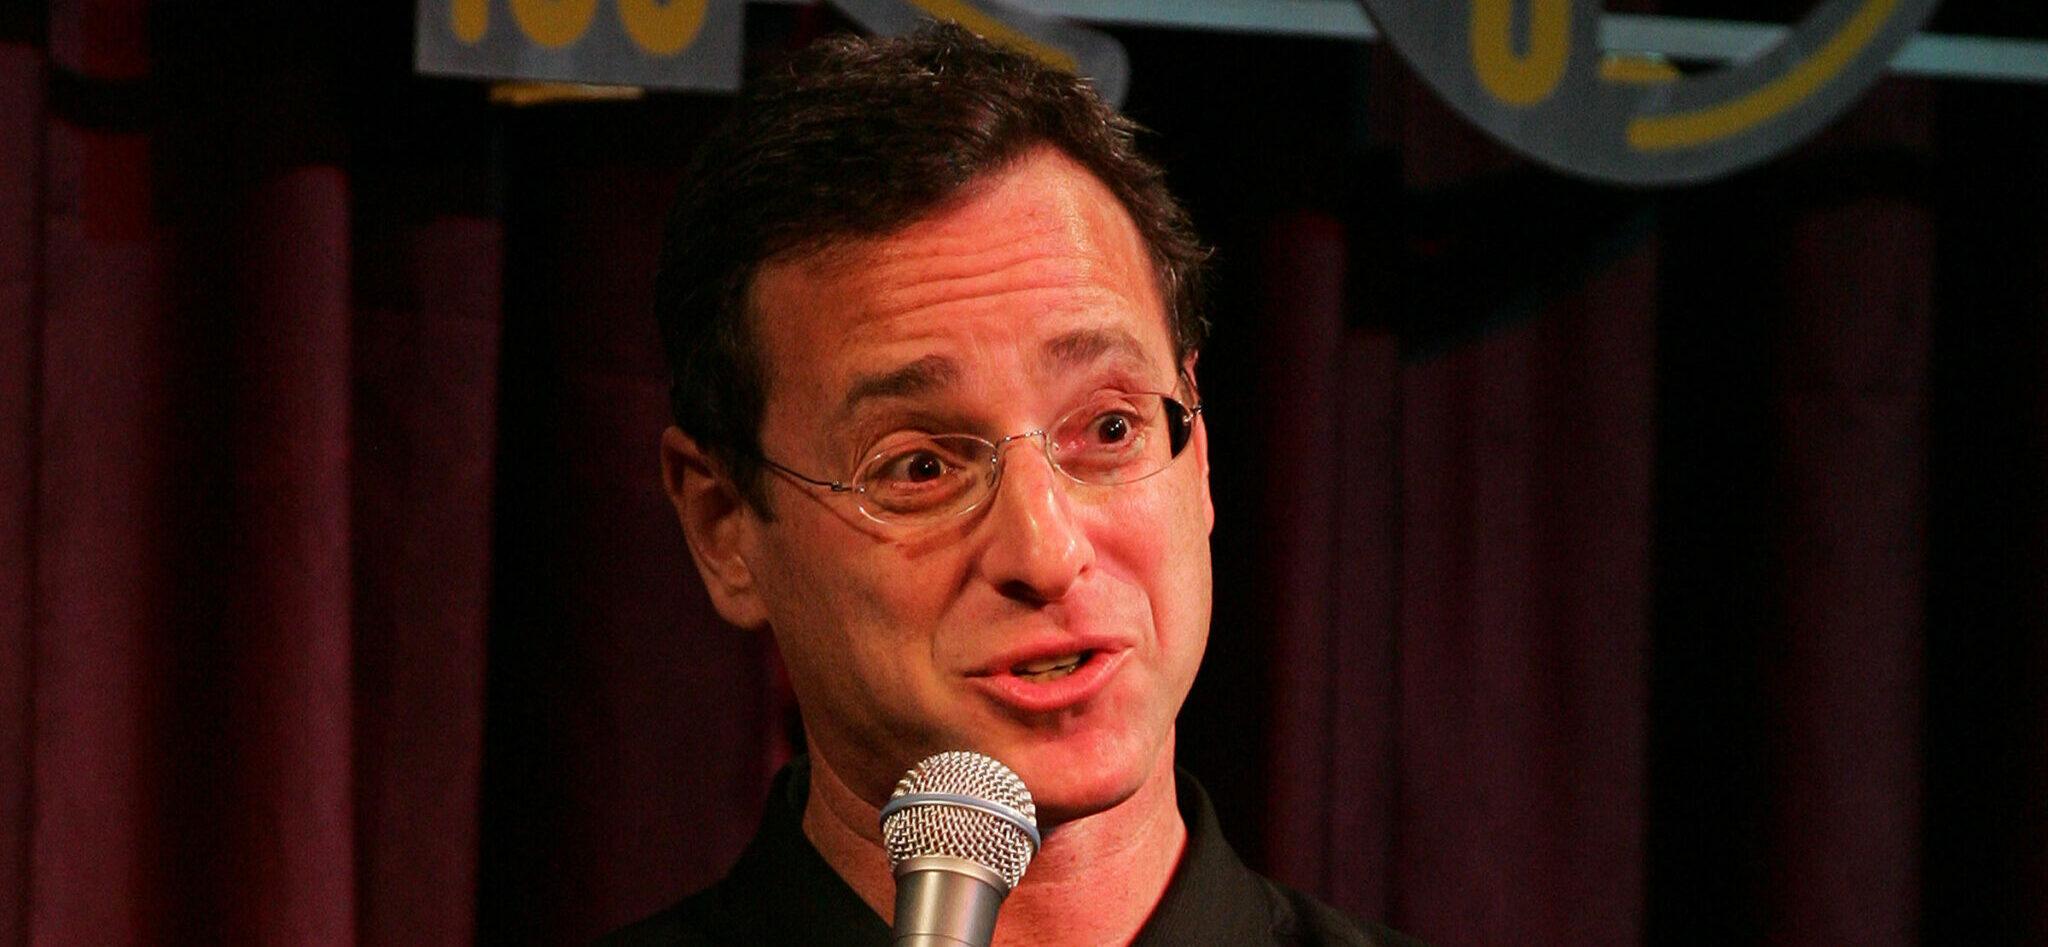 Comedian Bob Saget performs at the Improv Comedy Club at the Seminole Hard Rock Hotel and Casino February 24, 2006 in Hollywood, Florida. Photo by Ralph Notaro. 24 Feb 2006 Pictured: Comedian Bob Saget performs at the Improv Comedy Club at the Seminole Hard Rock Hotel and Casino February 24, 2006 in Hollywood, Florida.